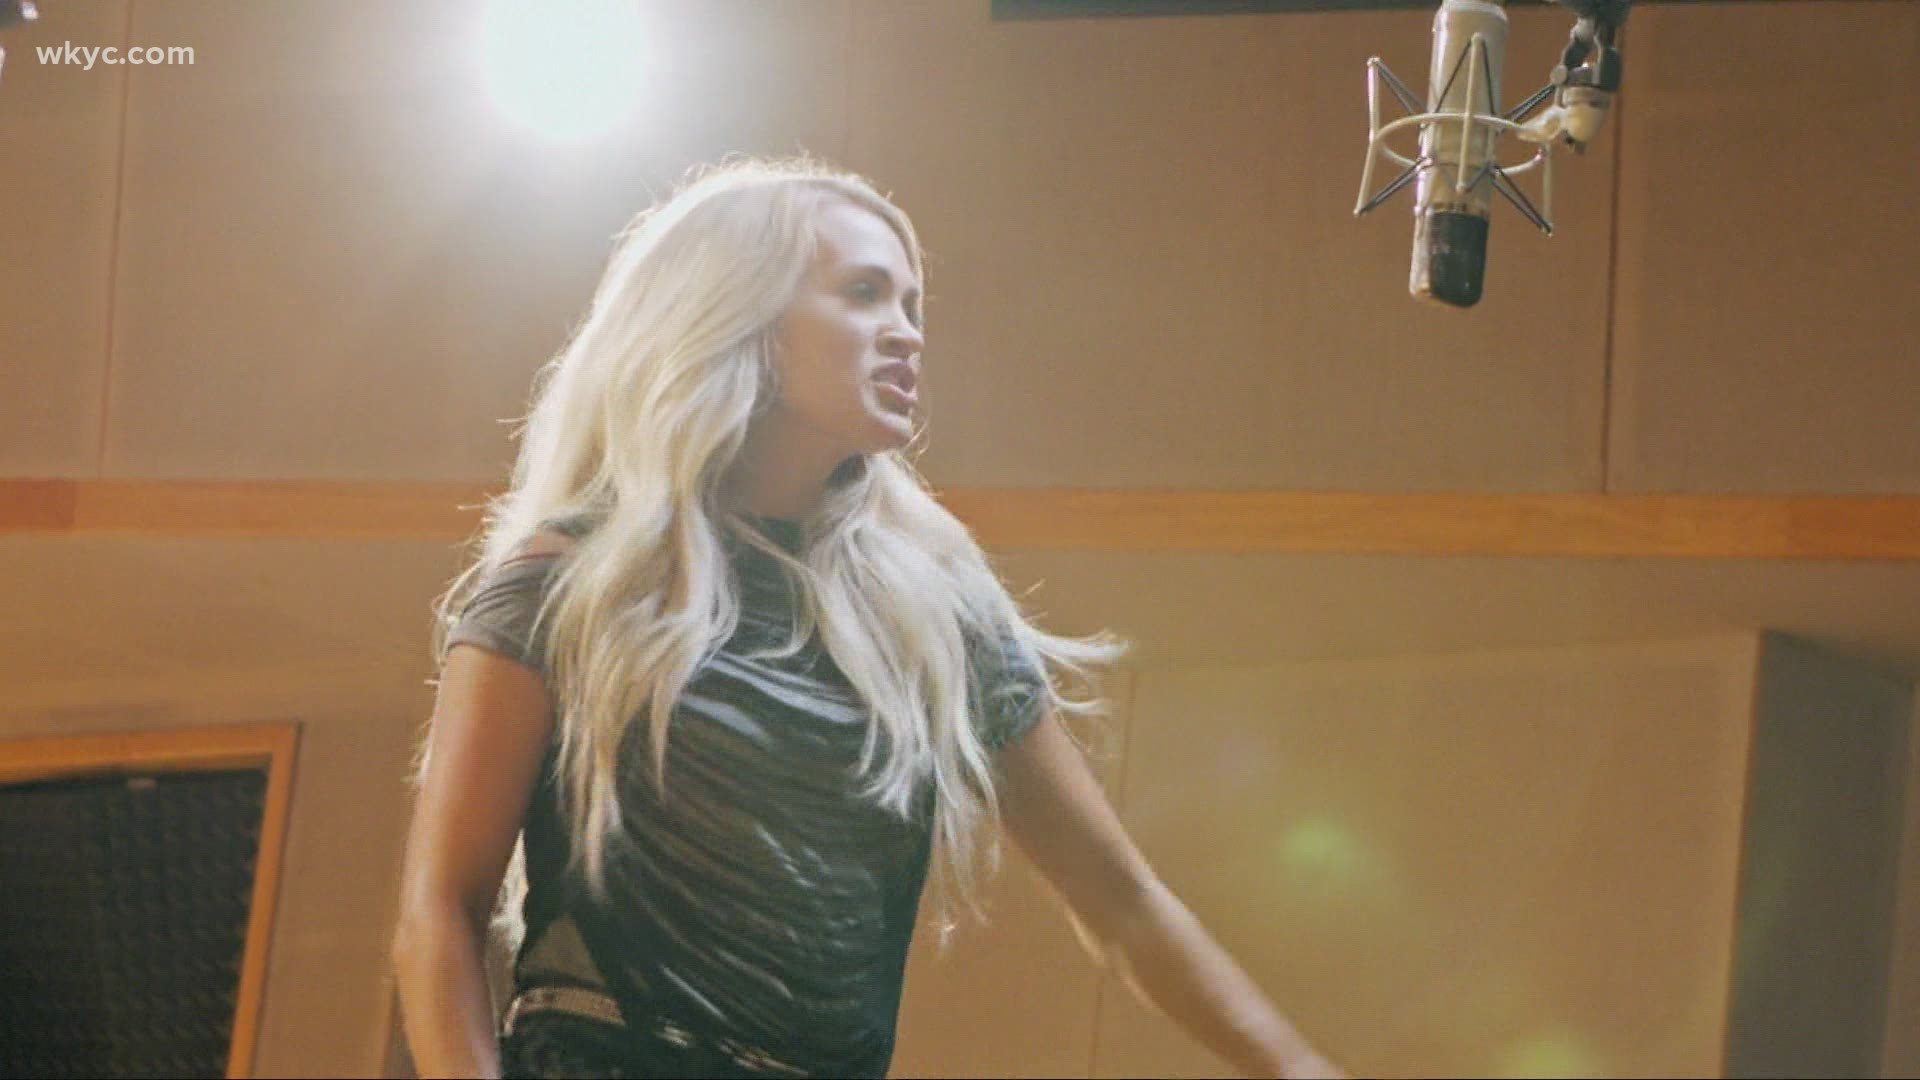 Sunday Night Football Theme Song: Carrie Underwood Gives Major News Update